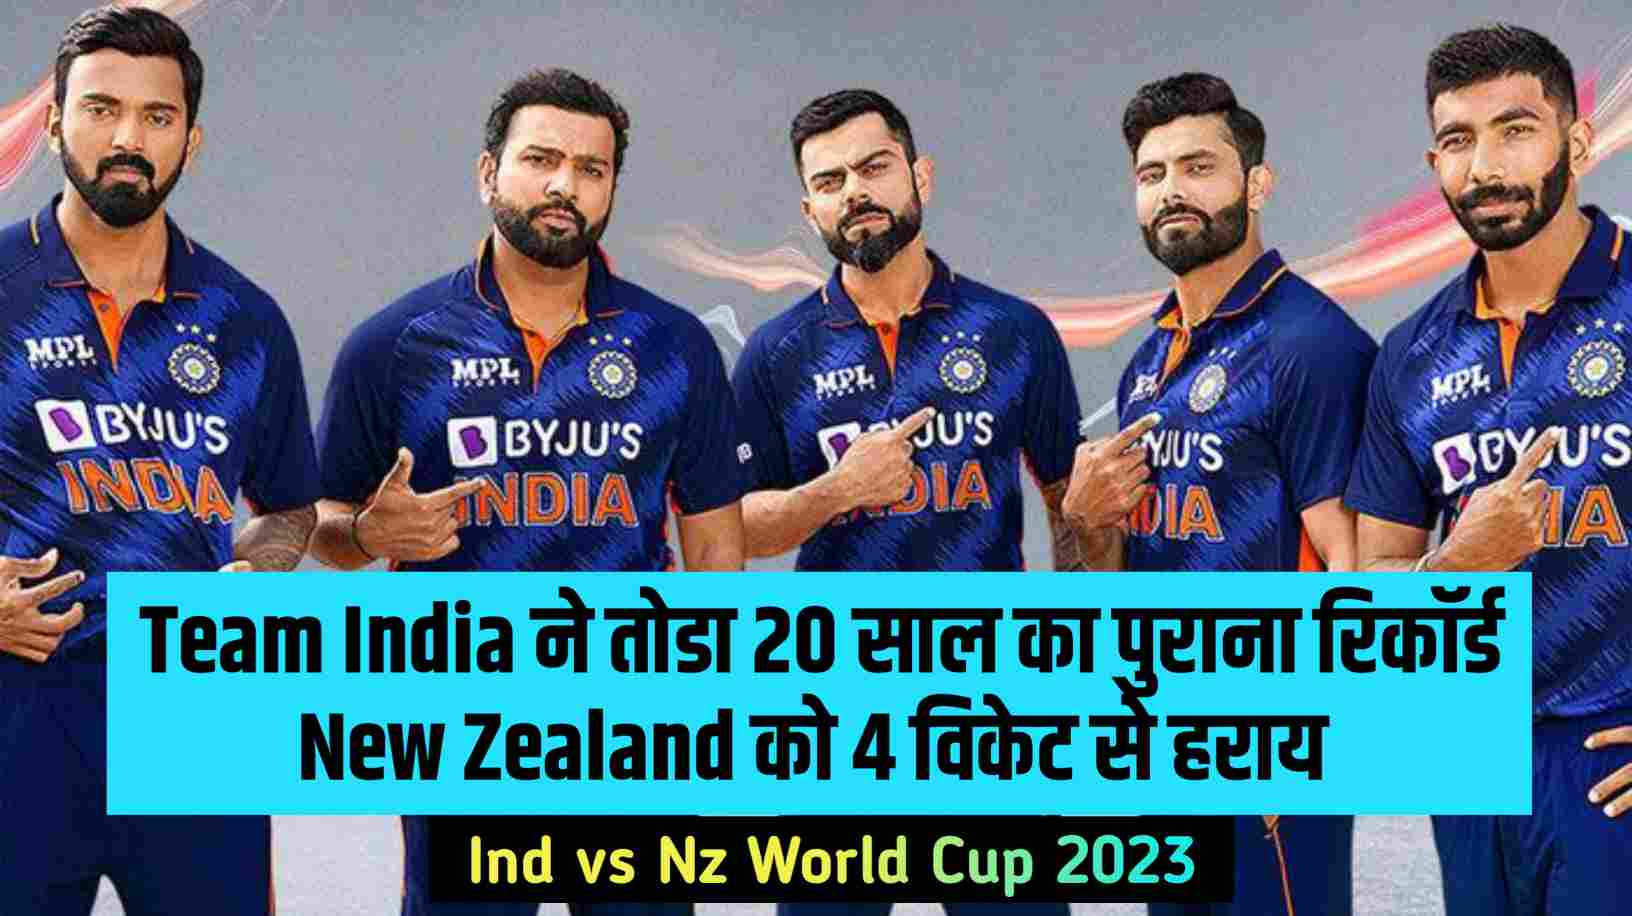 Ind vs Nz World Cup 2023